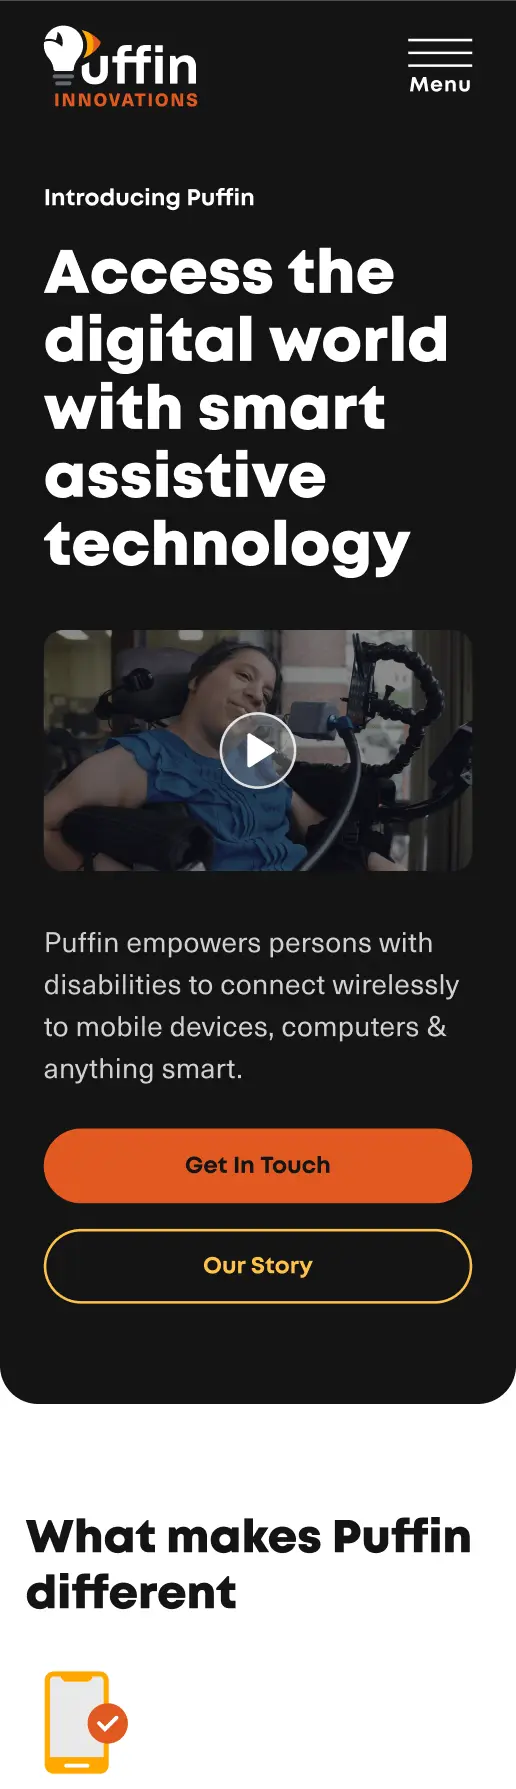 Top of mobile homepage. First section is black and titled 'Access the digital world with smart assistive technology' in large bold white text followed by video still of Adriana using Puffin and orange and yellow buttons. Second section is white and titled 'What makes Puffin different' with icon of phone and 'Easy to set up, easy to use' text below.